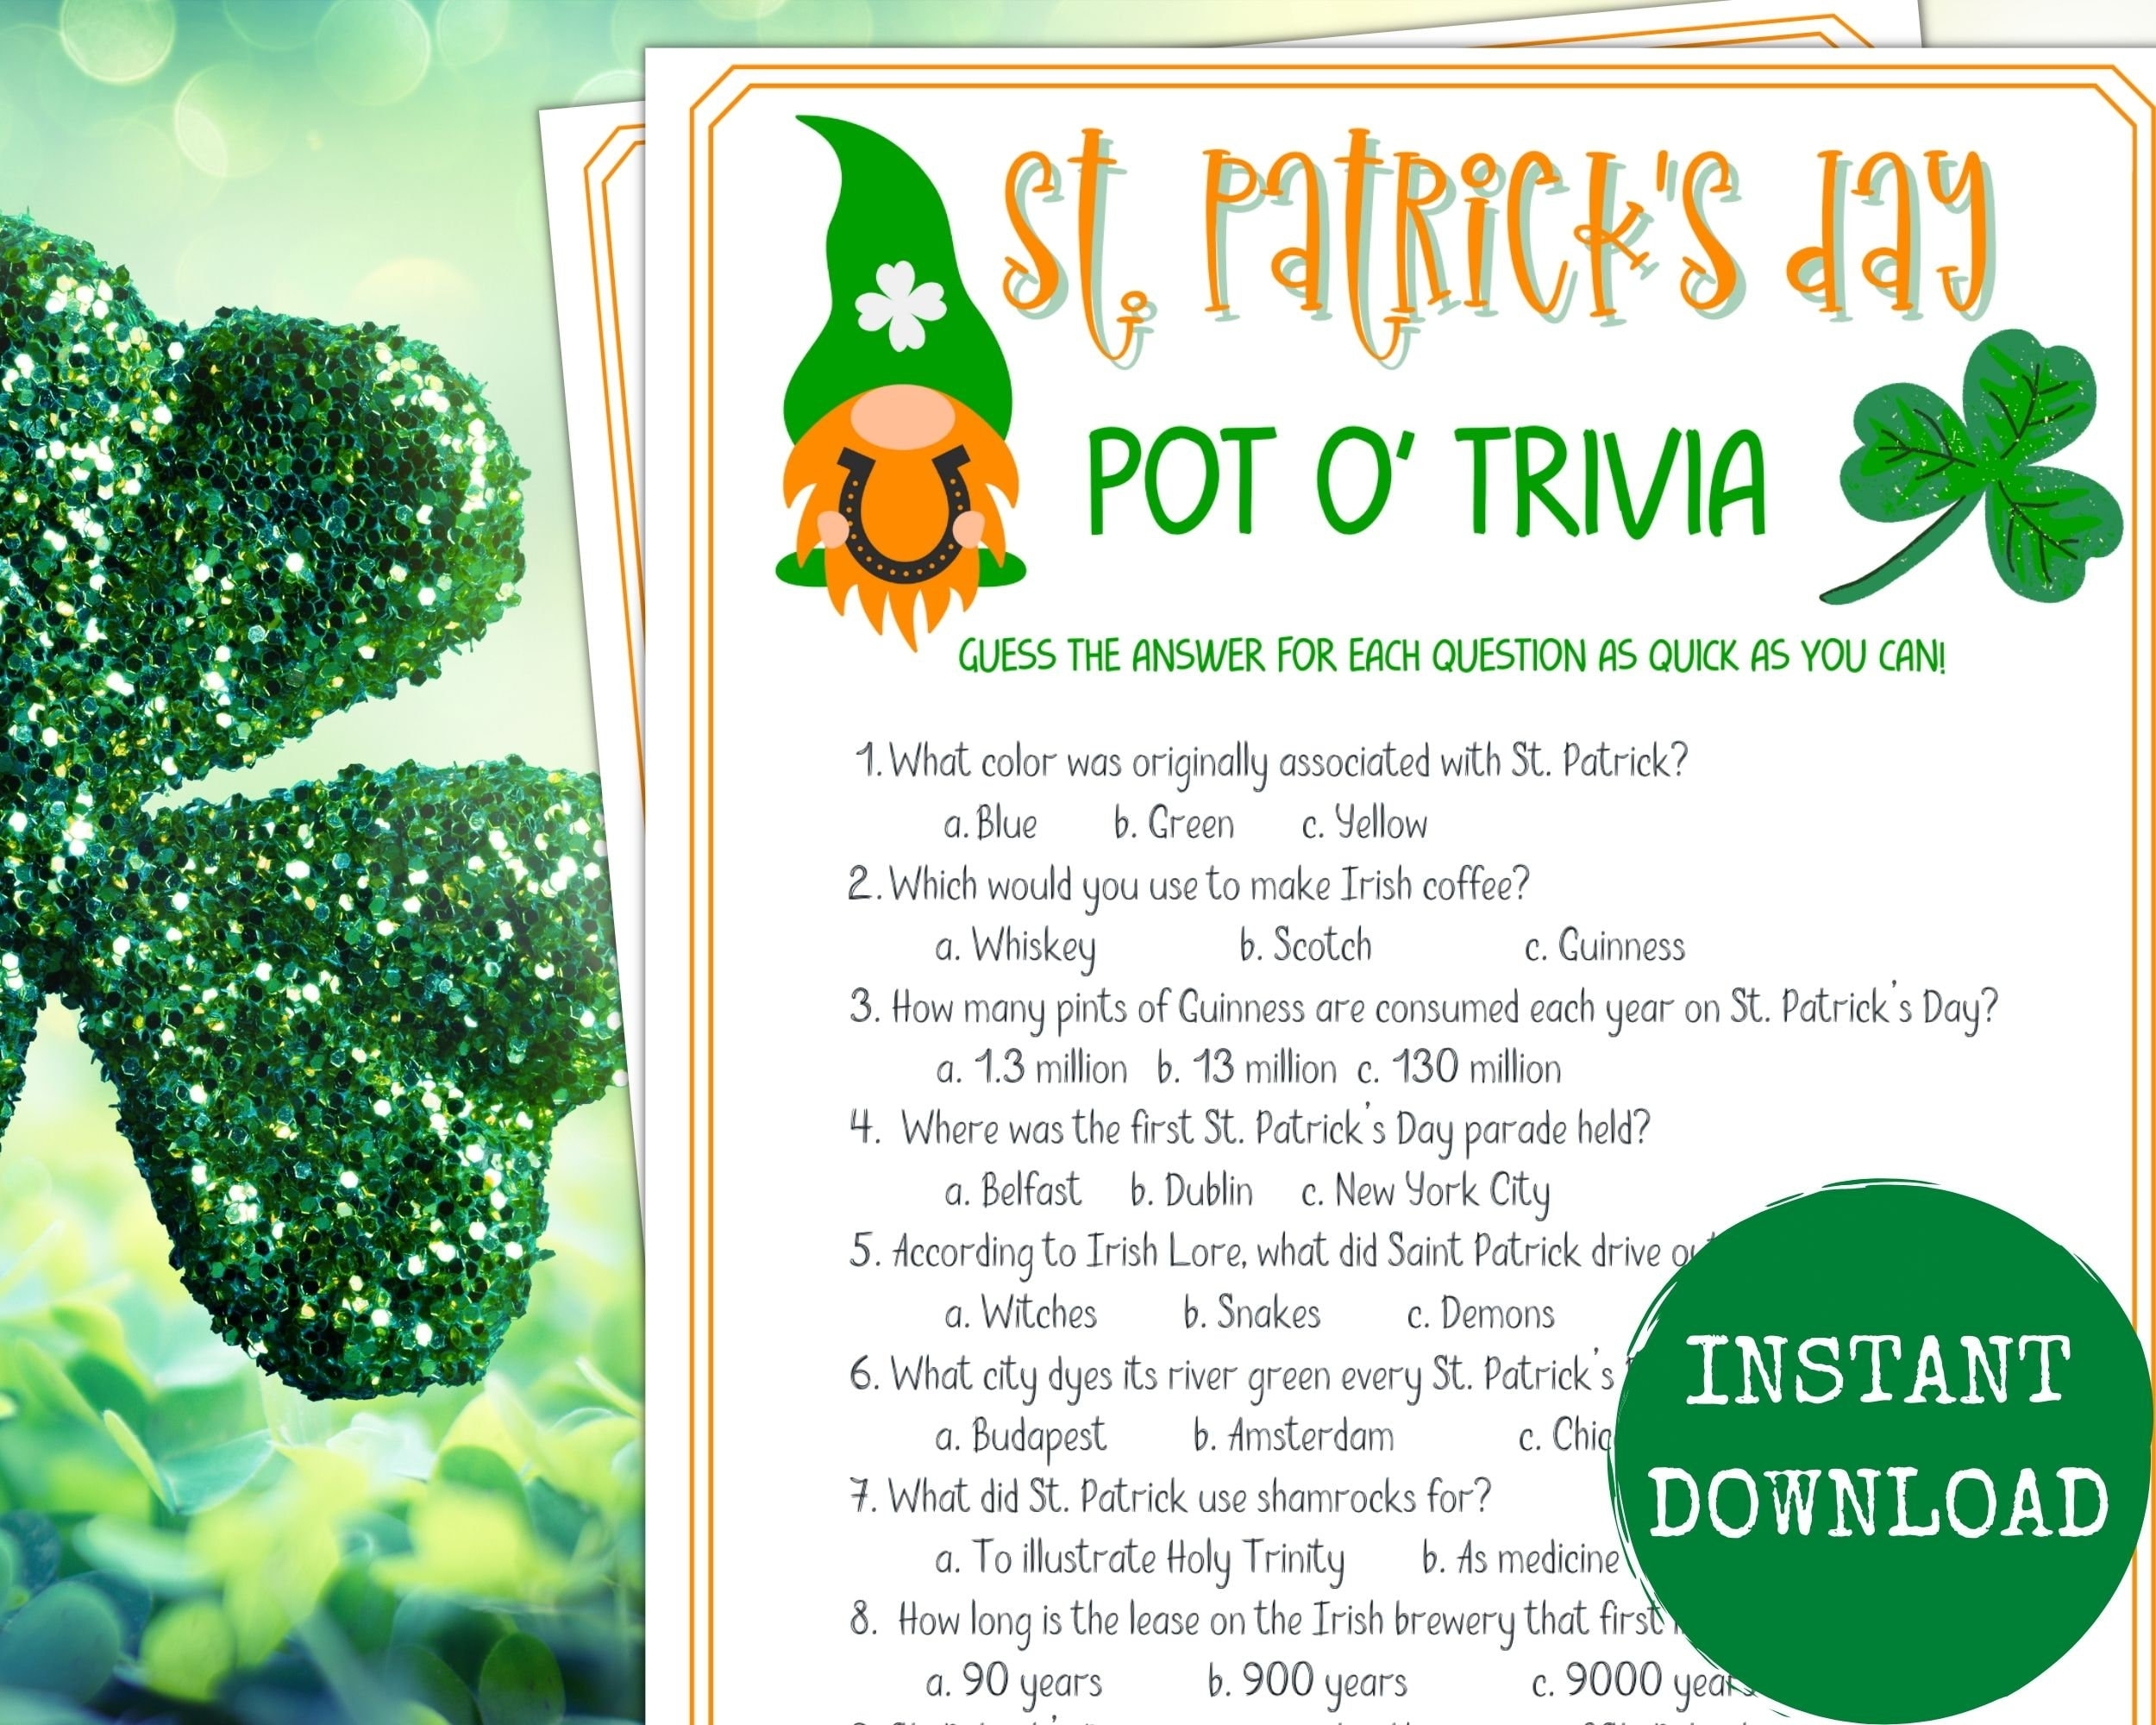 St Patrick s Day Trivia Game St Patty s Day Themed Party Printable St Patricks Day Games St Patty s Trivia Game St Patty s Day Fun Etsy